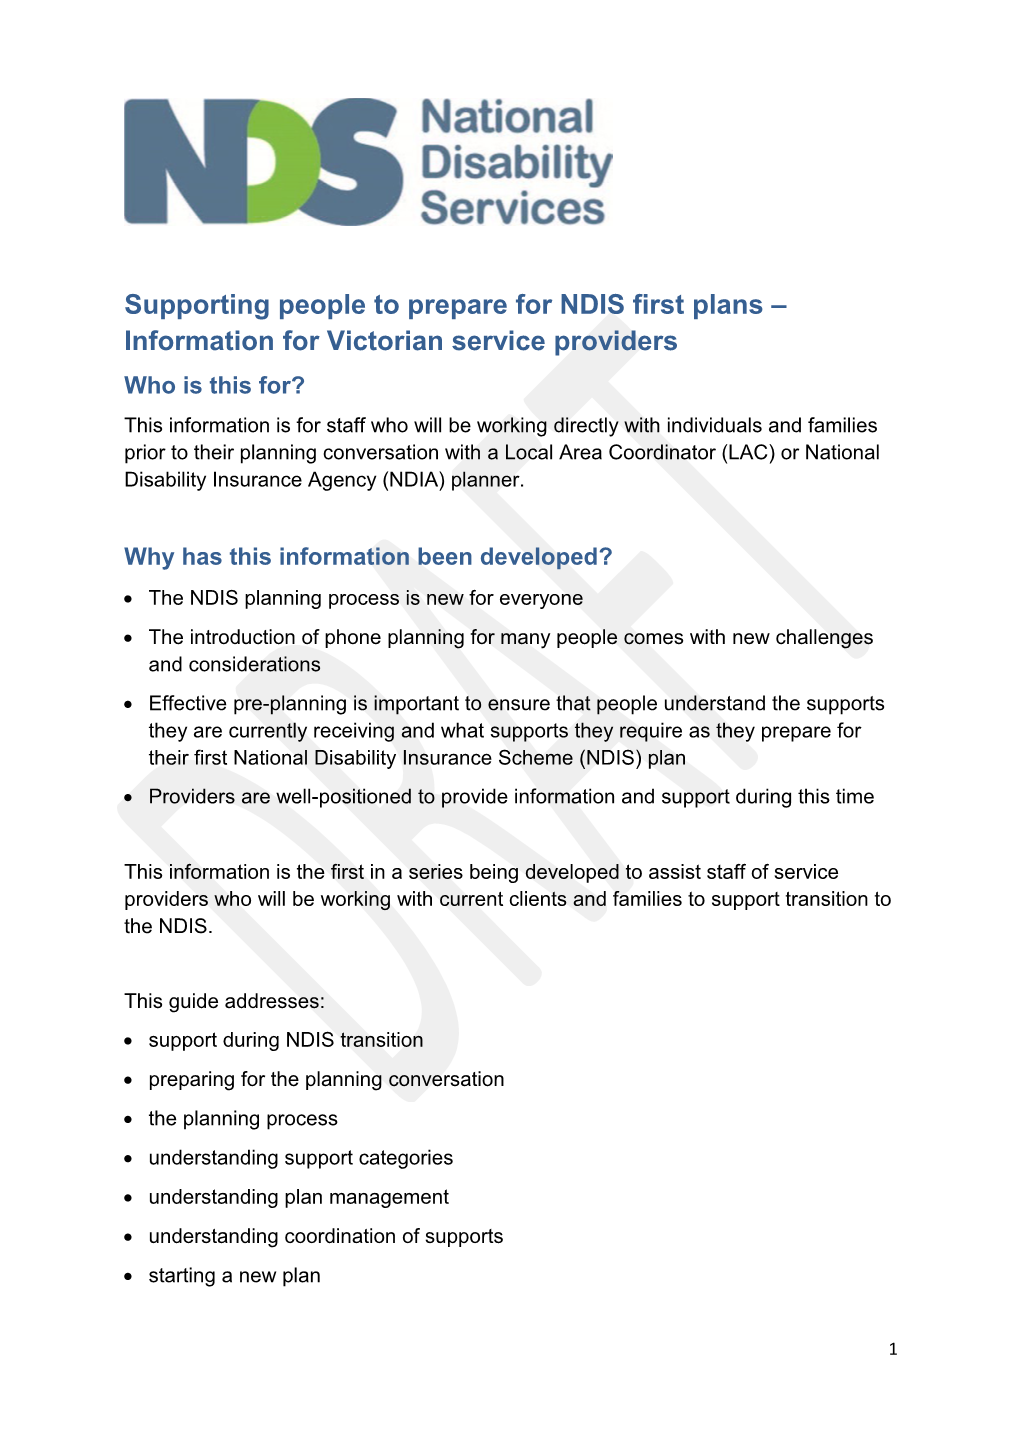 Supporting People to Prepare for NDIS First Plans Information for Victorian Service Providers